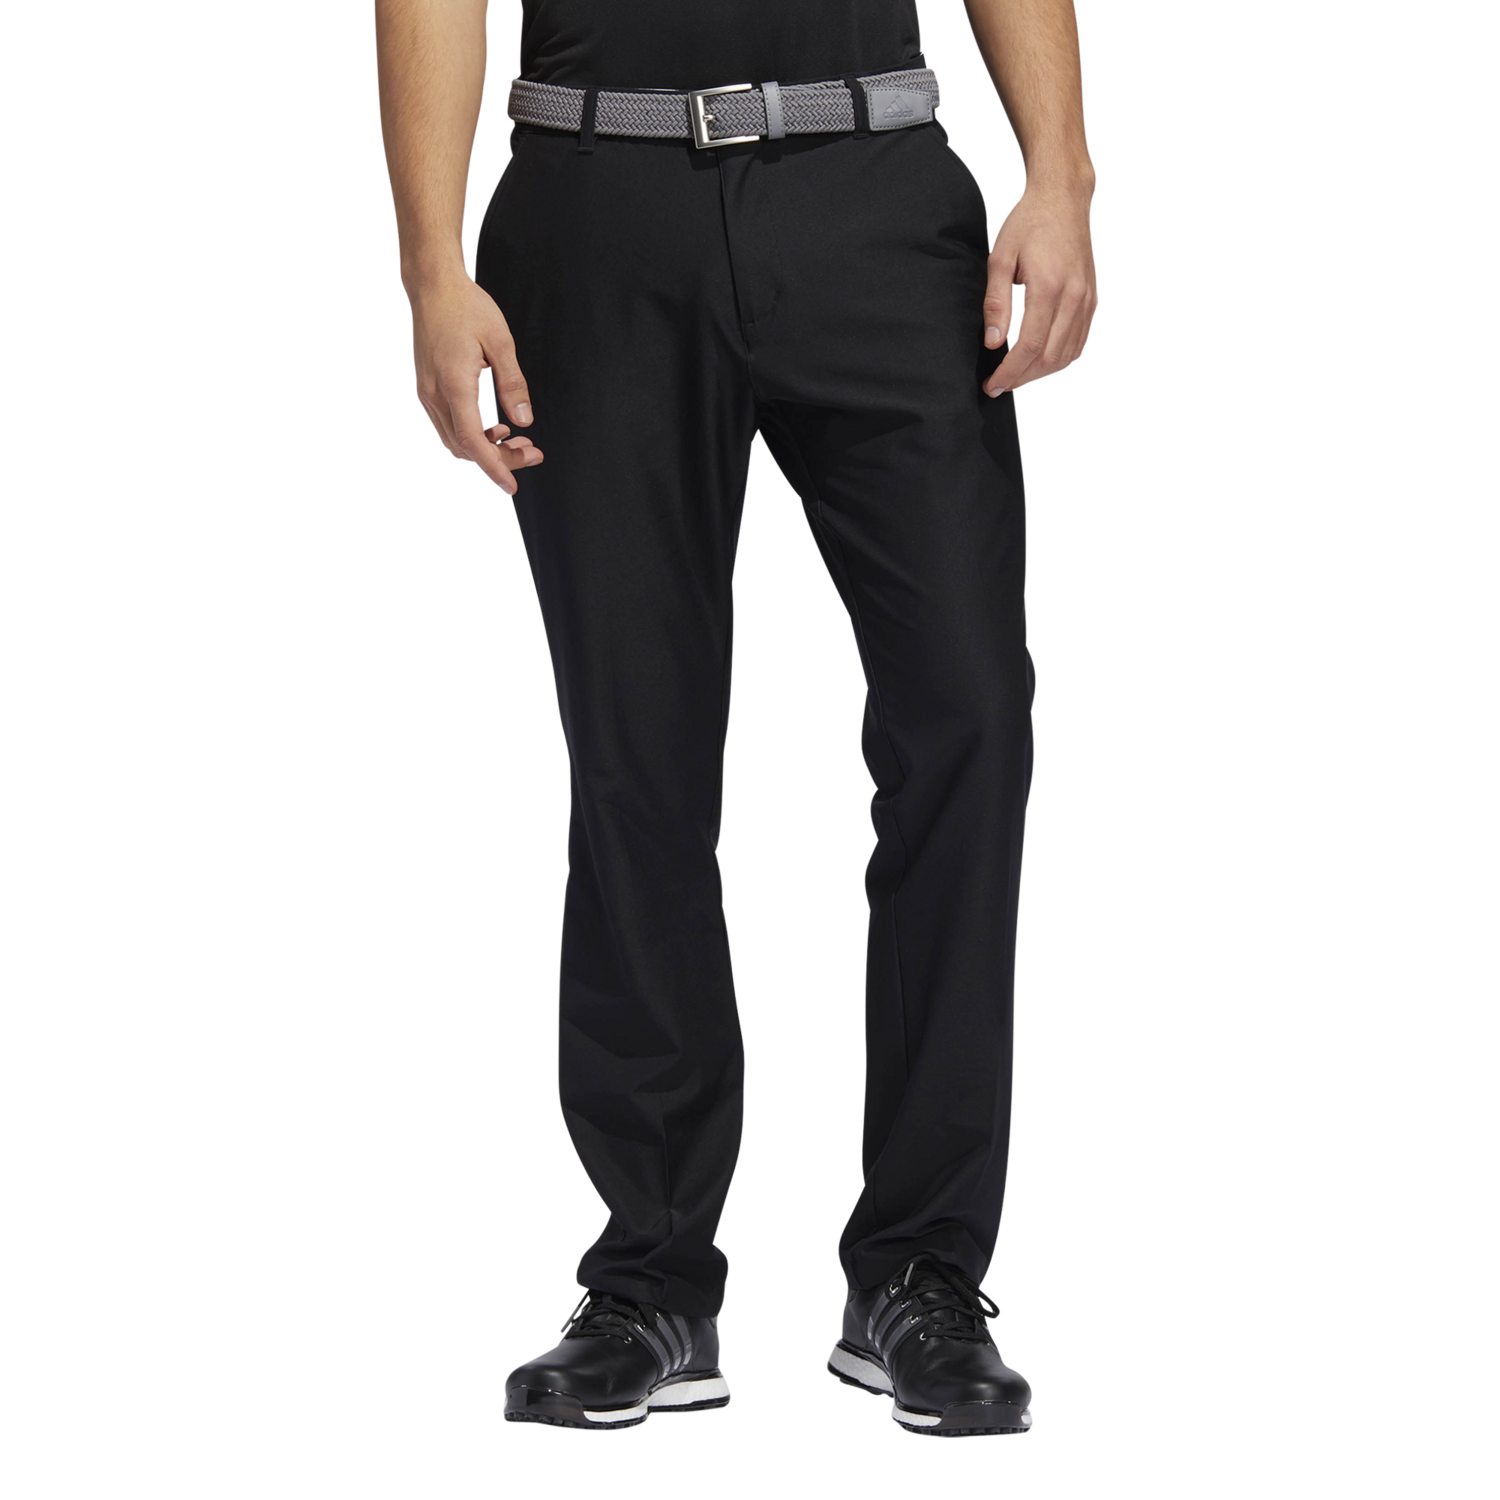 adidas golf ultimate365 classic trouser